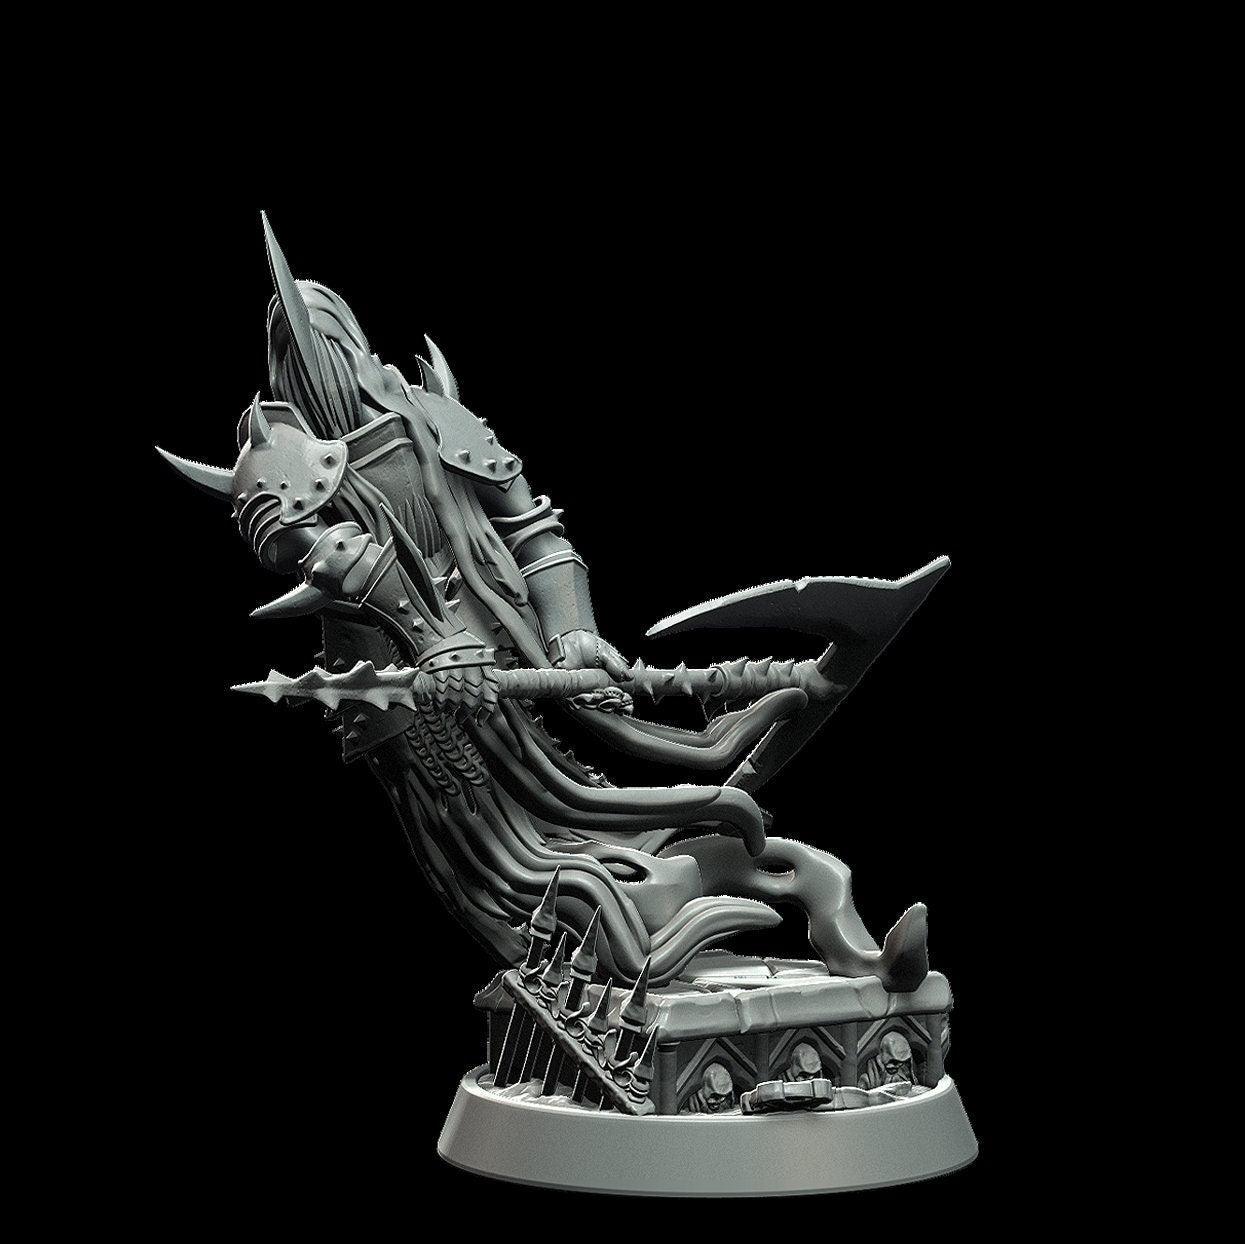 DnD Corrupted Fiend Miniature - 3 Poses - 28mm scale Tabletop gaming DnD Miniature Dungeons and Dragons dnd 5e - Plague Miniatures shop for DnD Miniatures